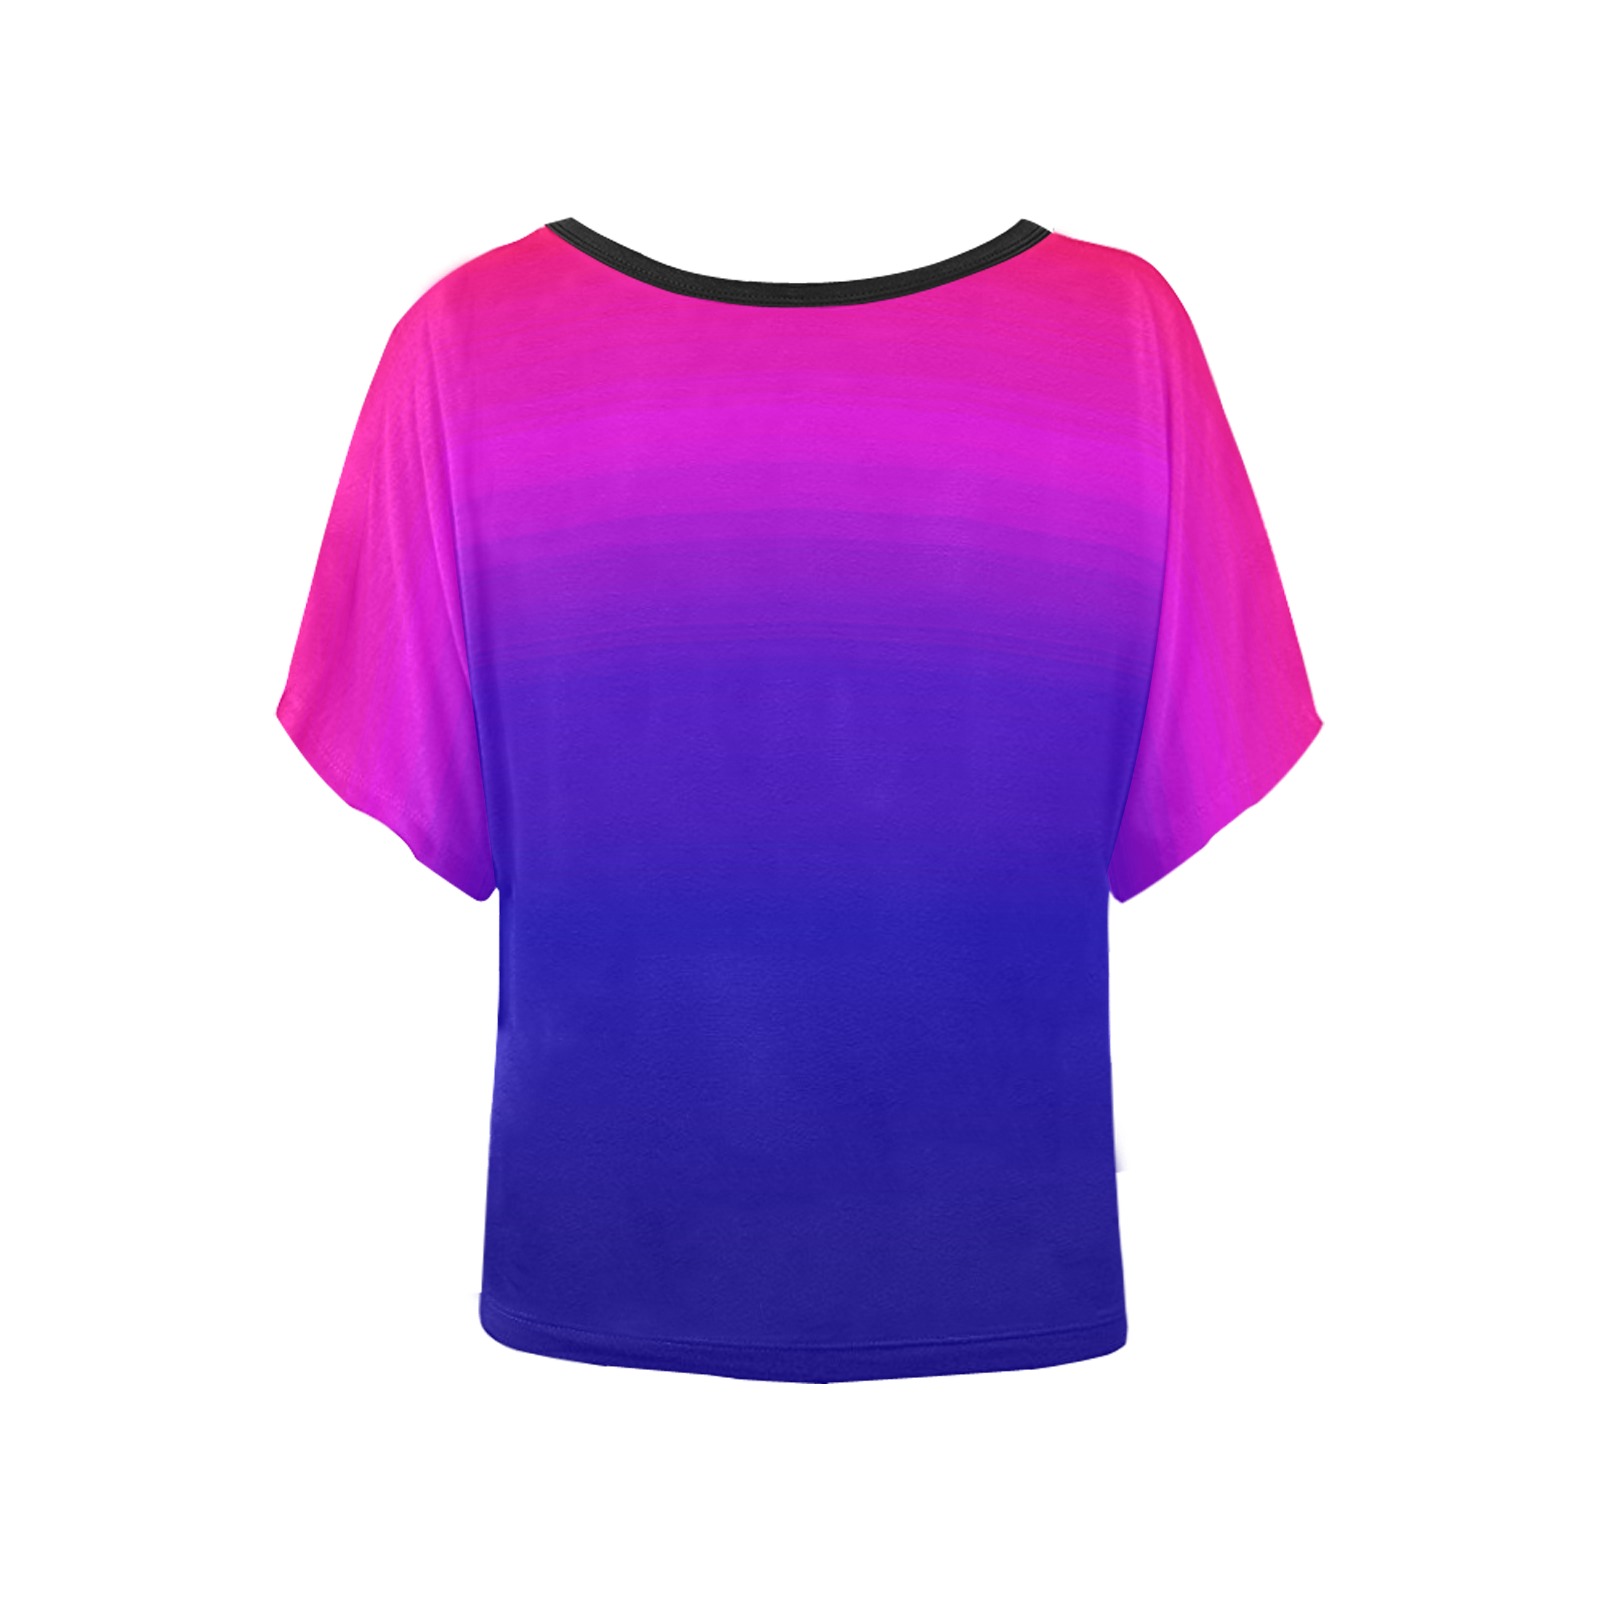 pink and blue Women's Batwing-Sleeved Blouse T shirt (Model T44)